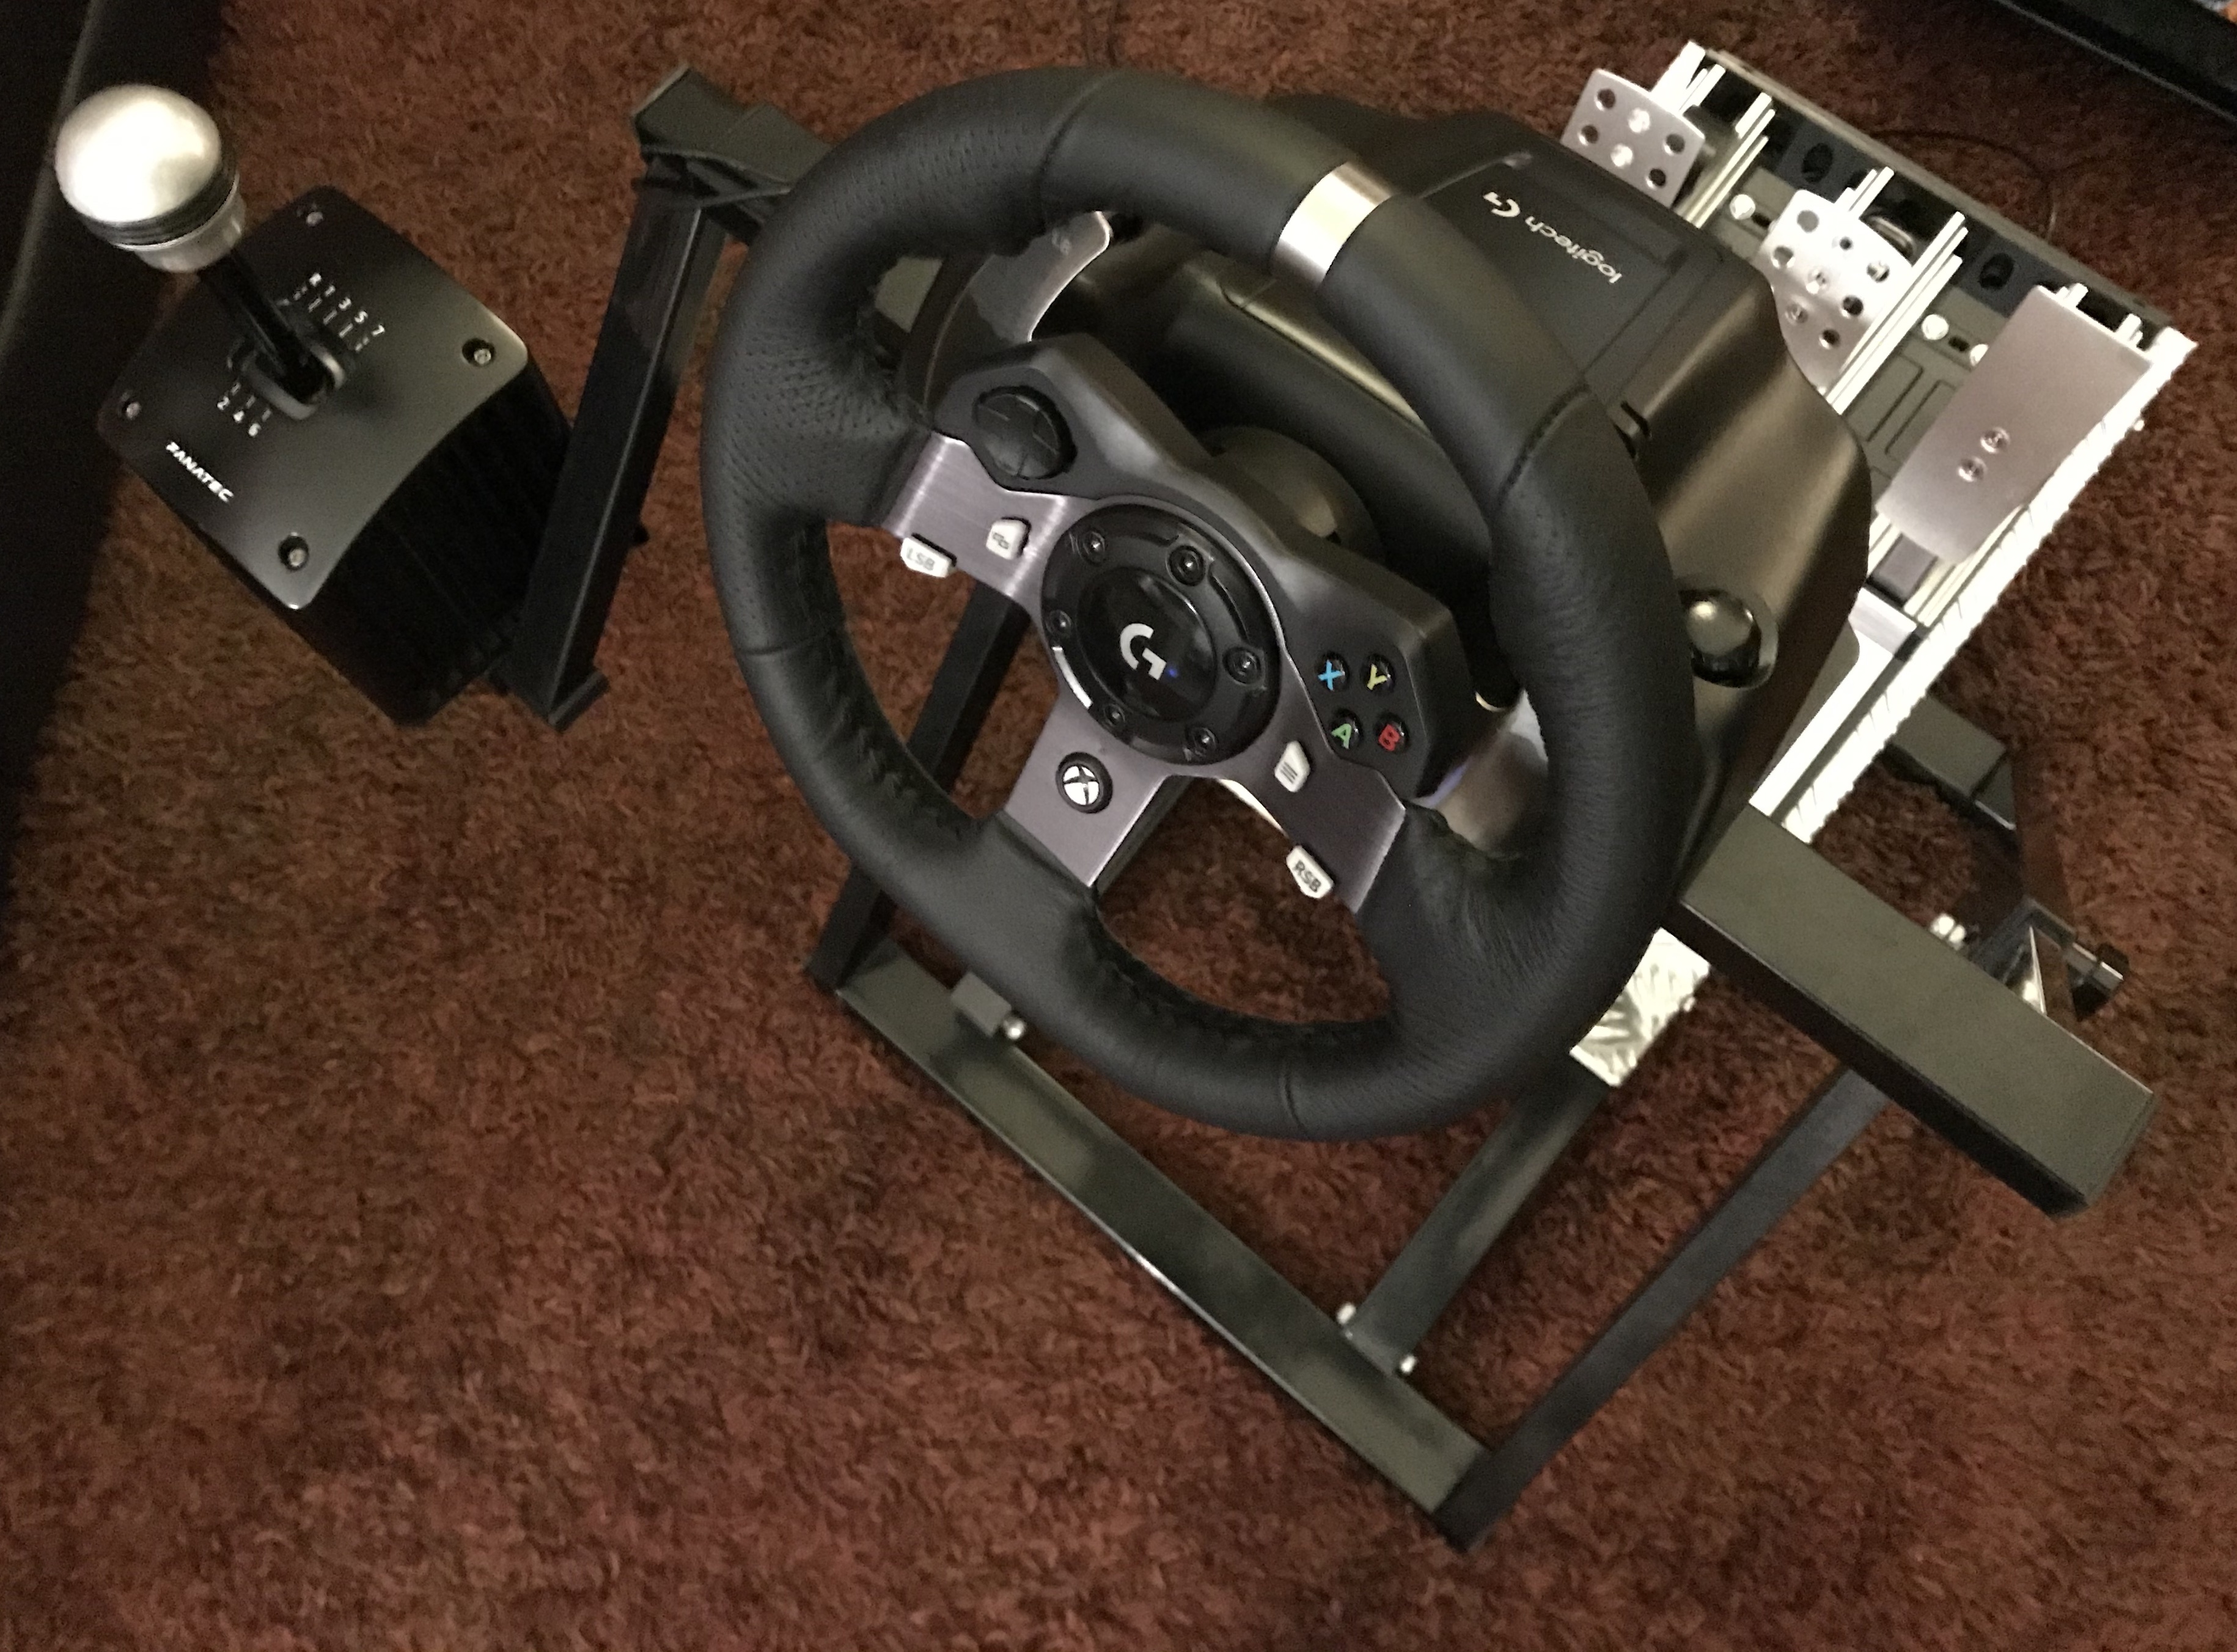 ClubSport shifter and Logitech combo? Fanatec